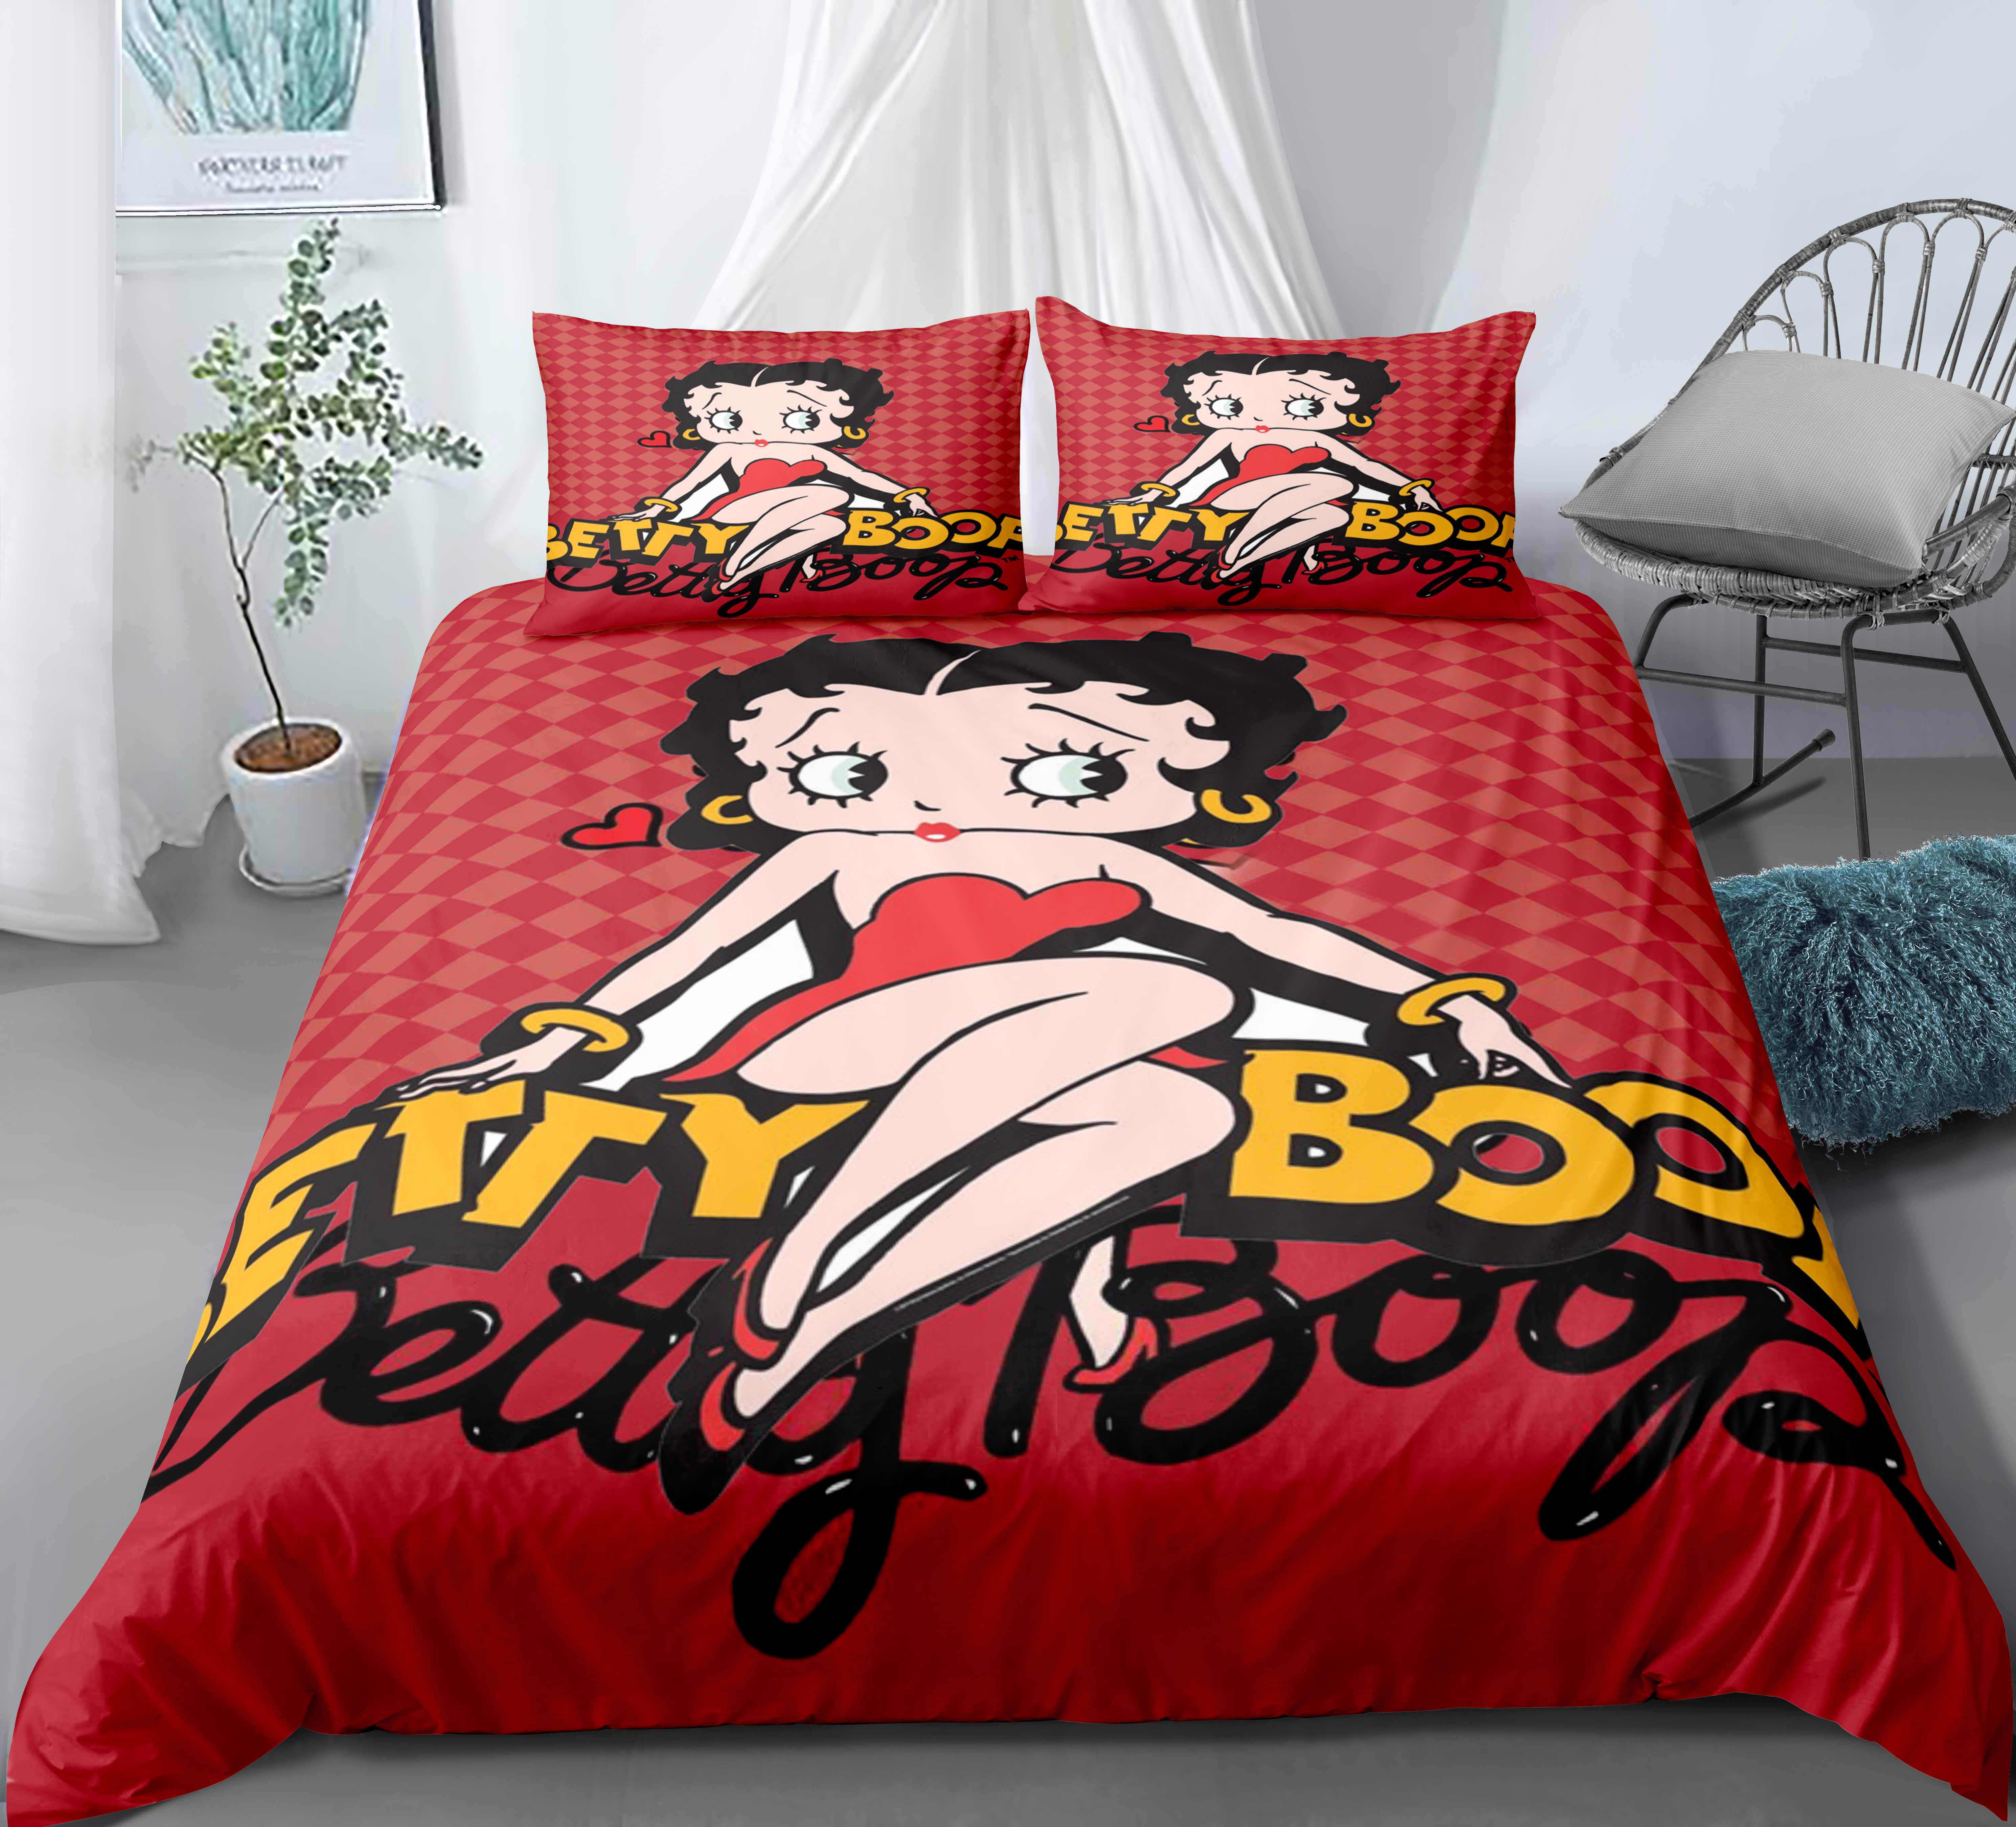 SINGLE BED DUVET COVER SET BETTY BOOP LIPS PICTURE PERFECT ORANGE PINK GIRLS 